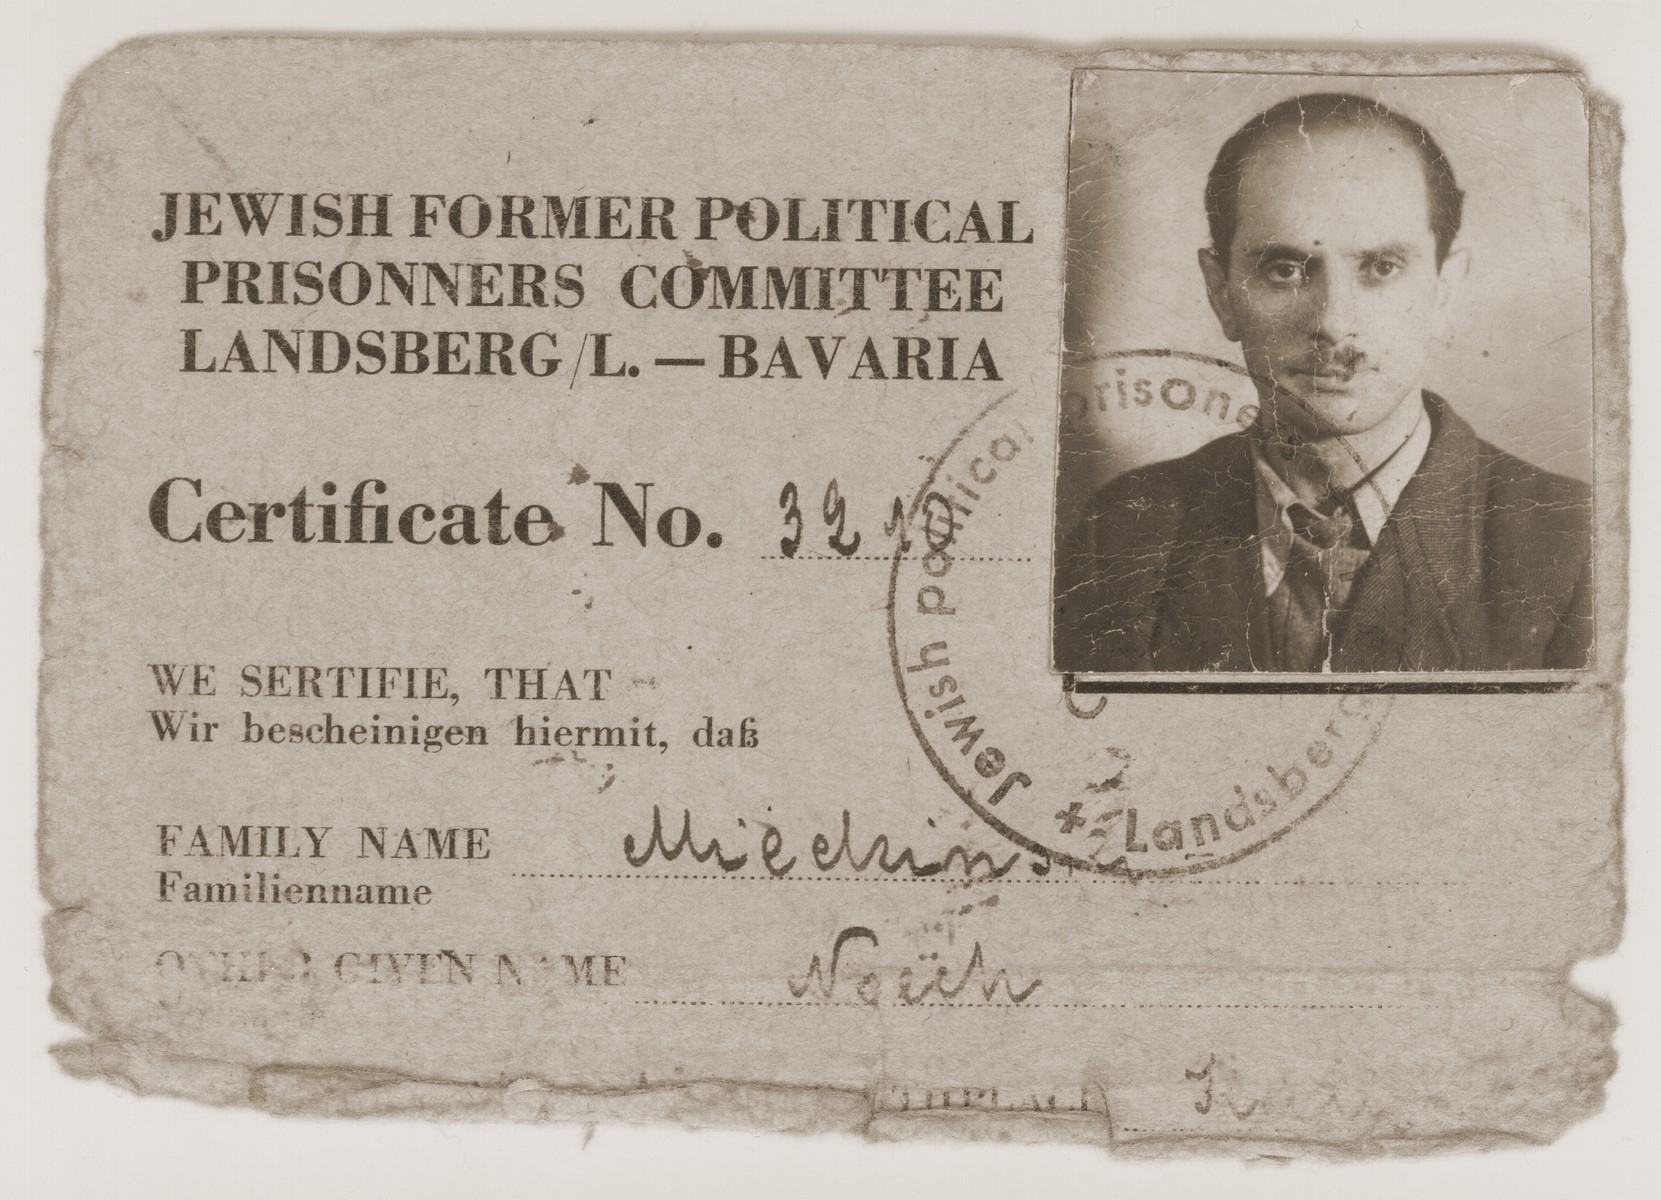 Identification card certifying that Noach Miedzinski, camp director of the Kibbutz Nili hachshara (Zionist collective), is a member of the Jewish Former Political Prisoners Committee at Landsberg.